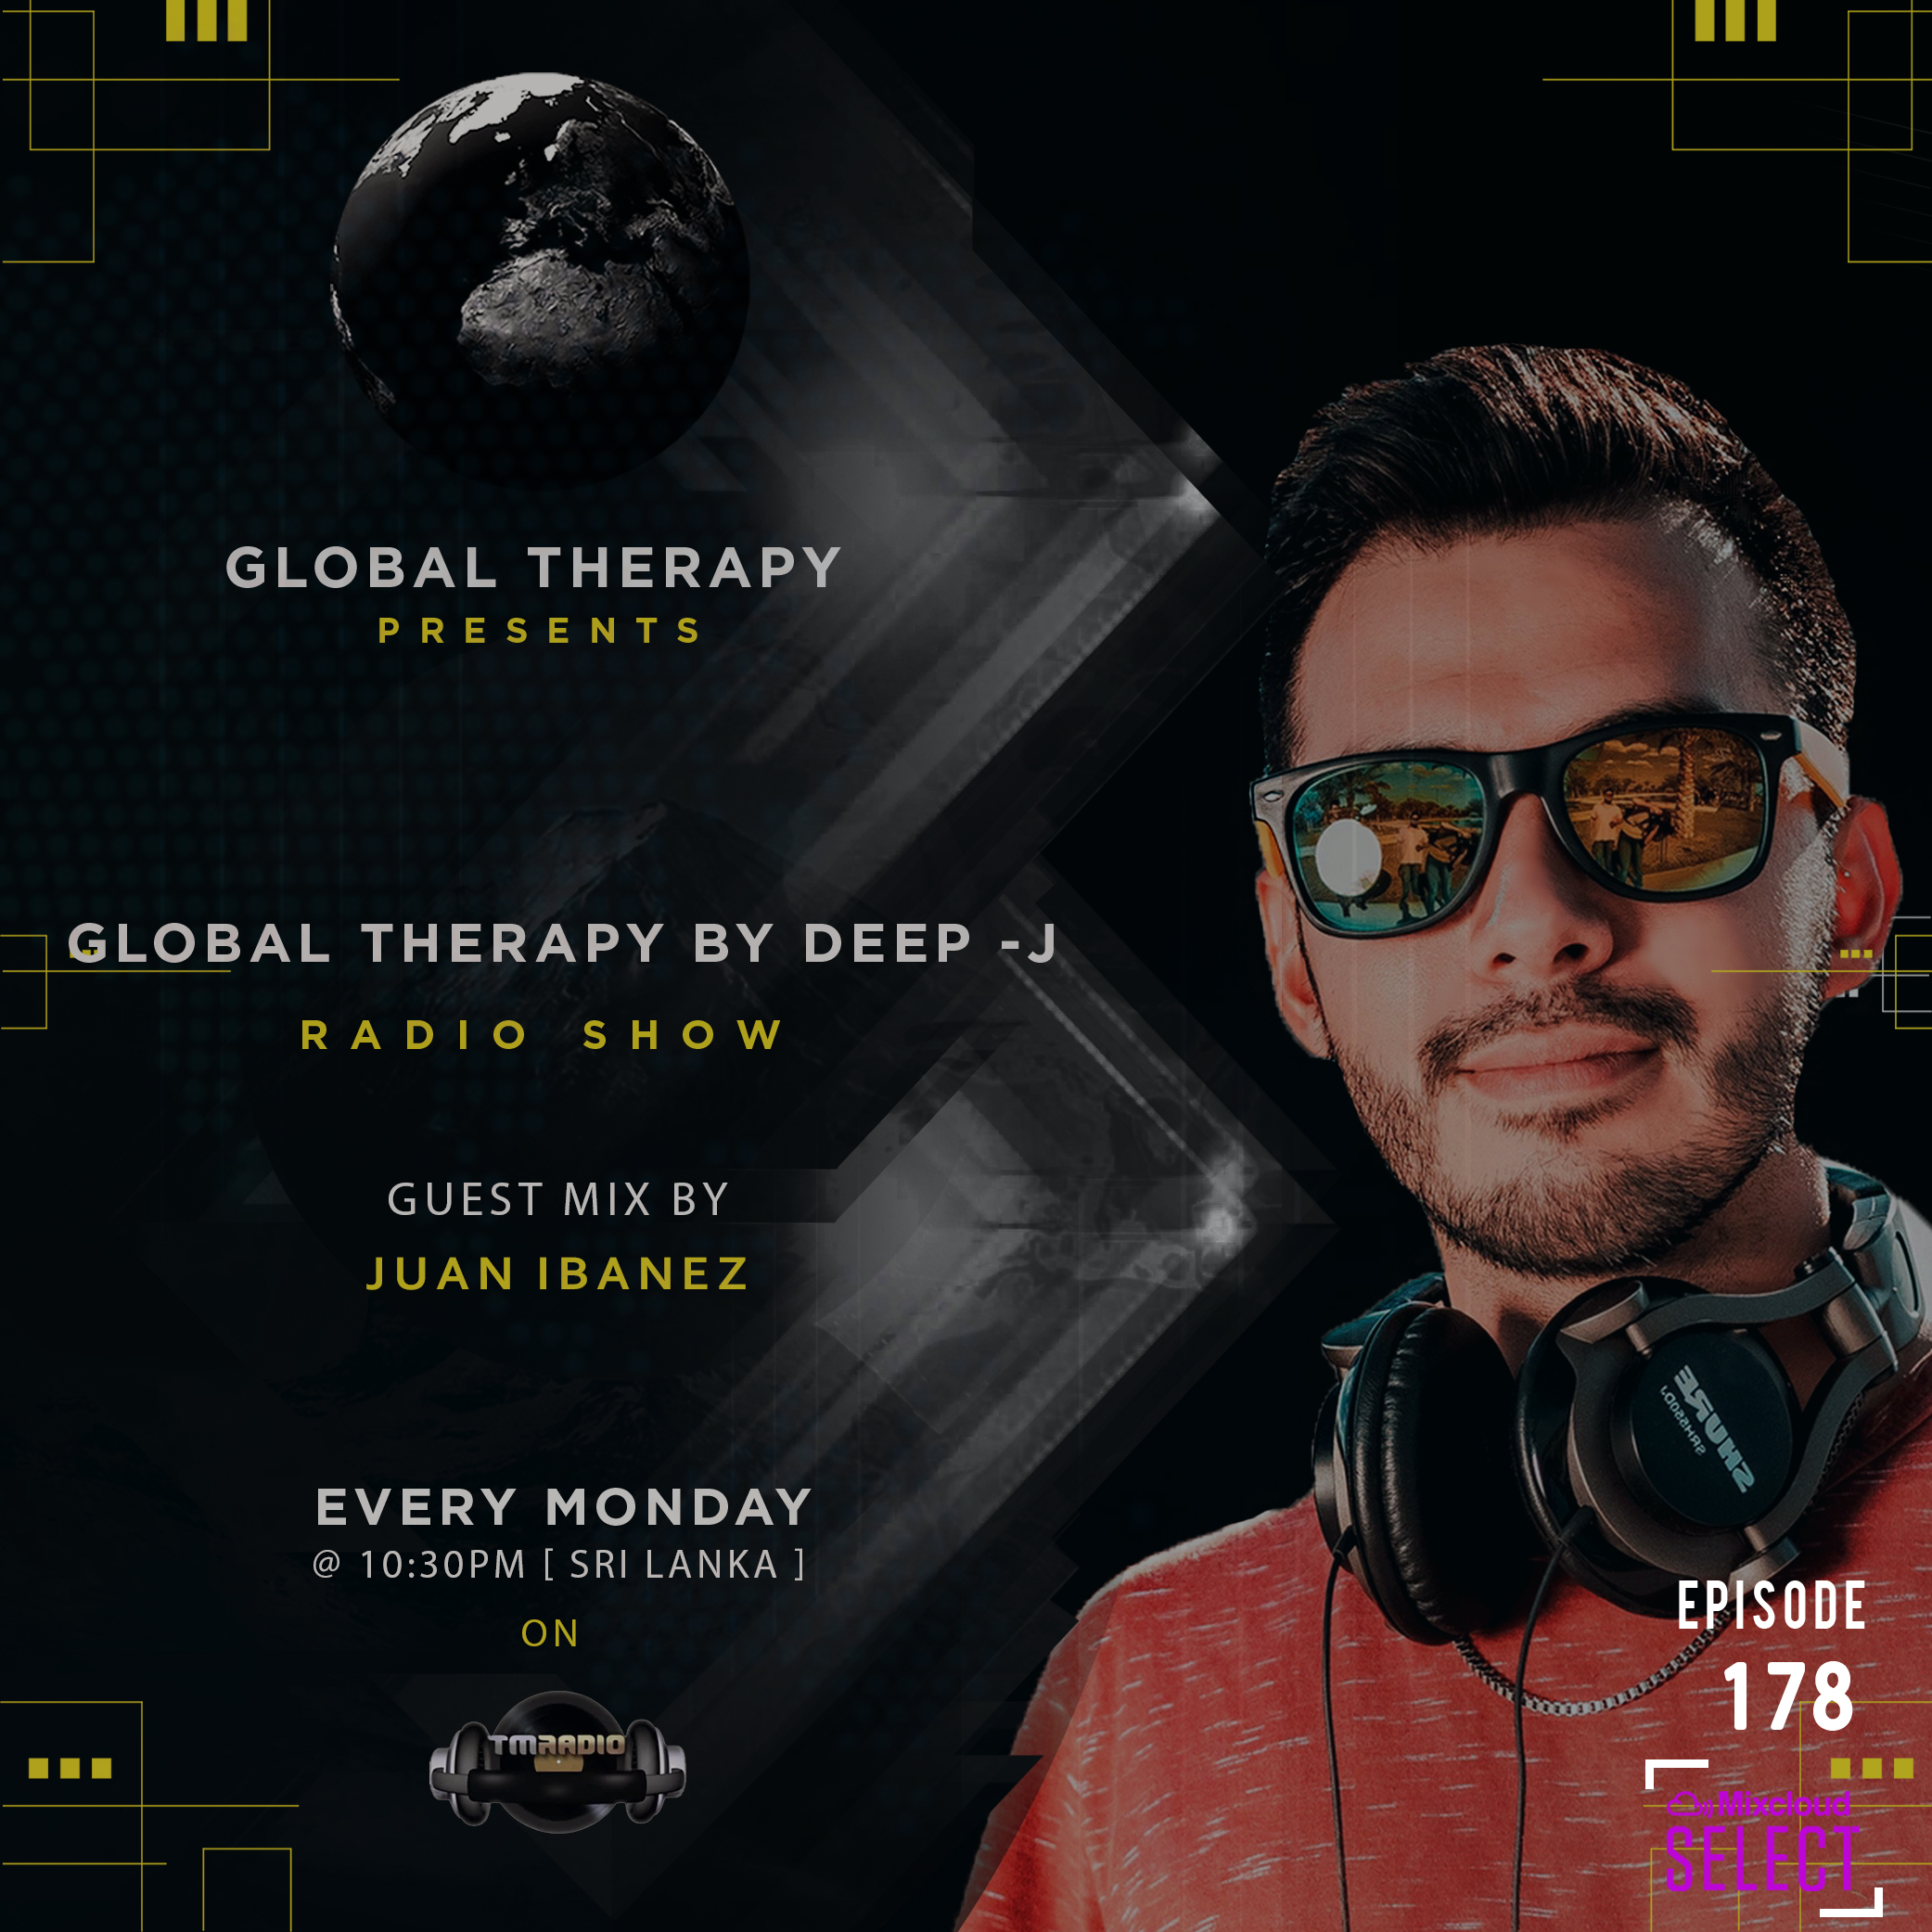 Global Therapy :: GLOBAL THERAPY EPISODE 178 +Guest Mix by Juan Ibanez (aired on March 9th, 2020) banner logo